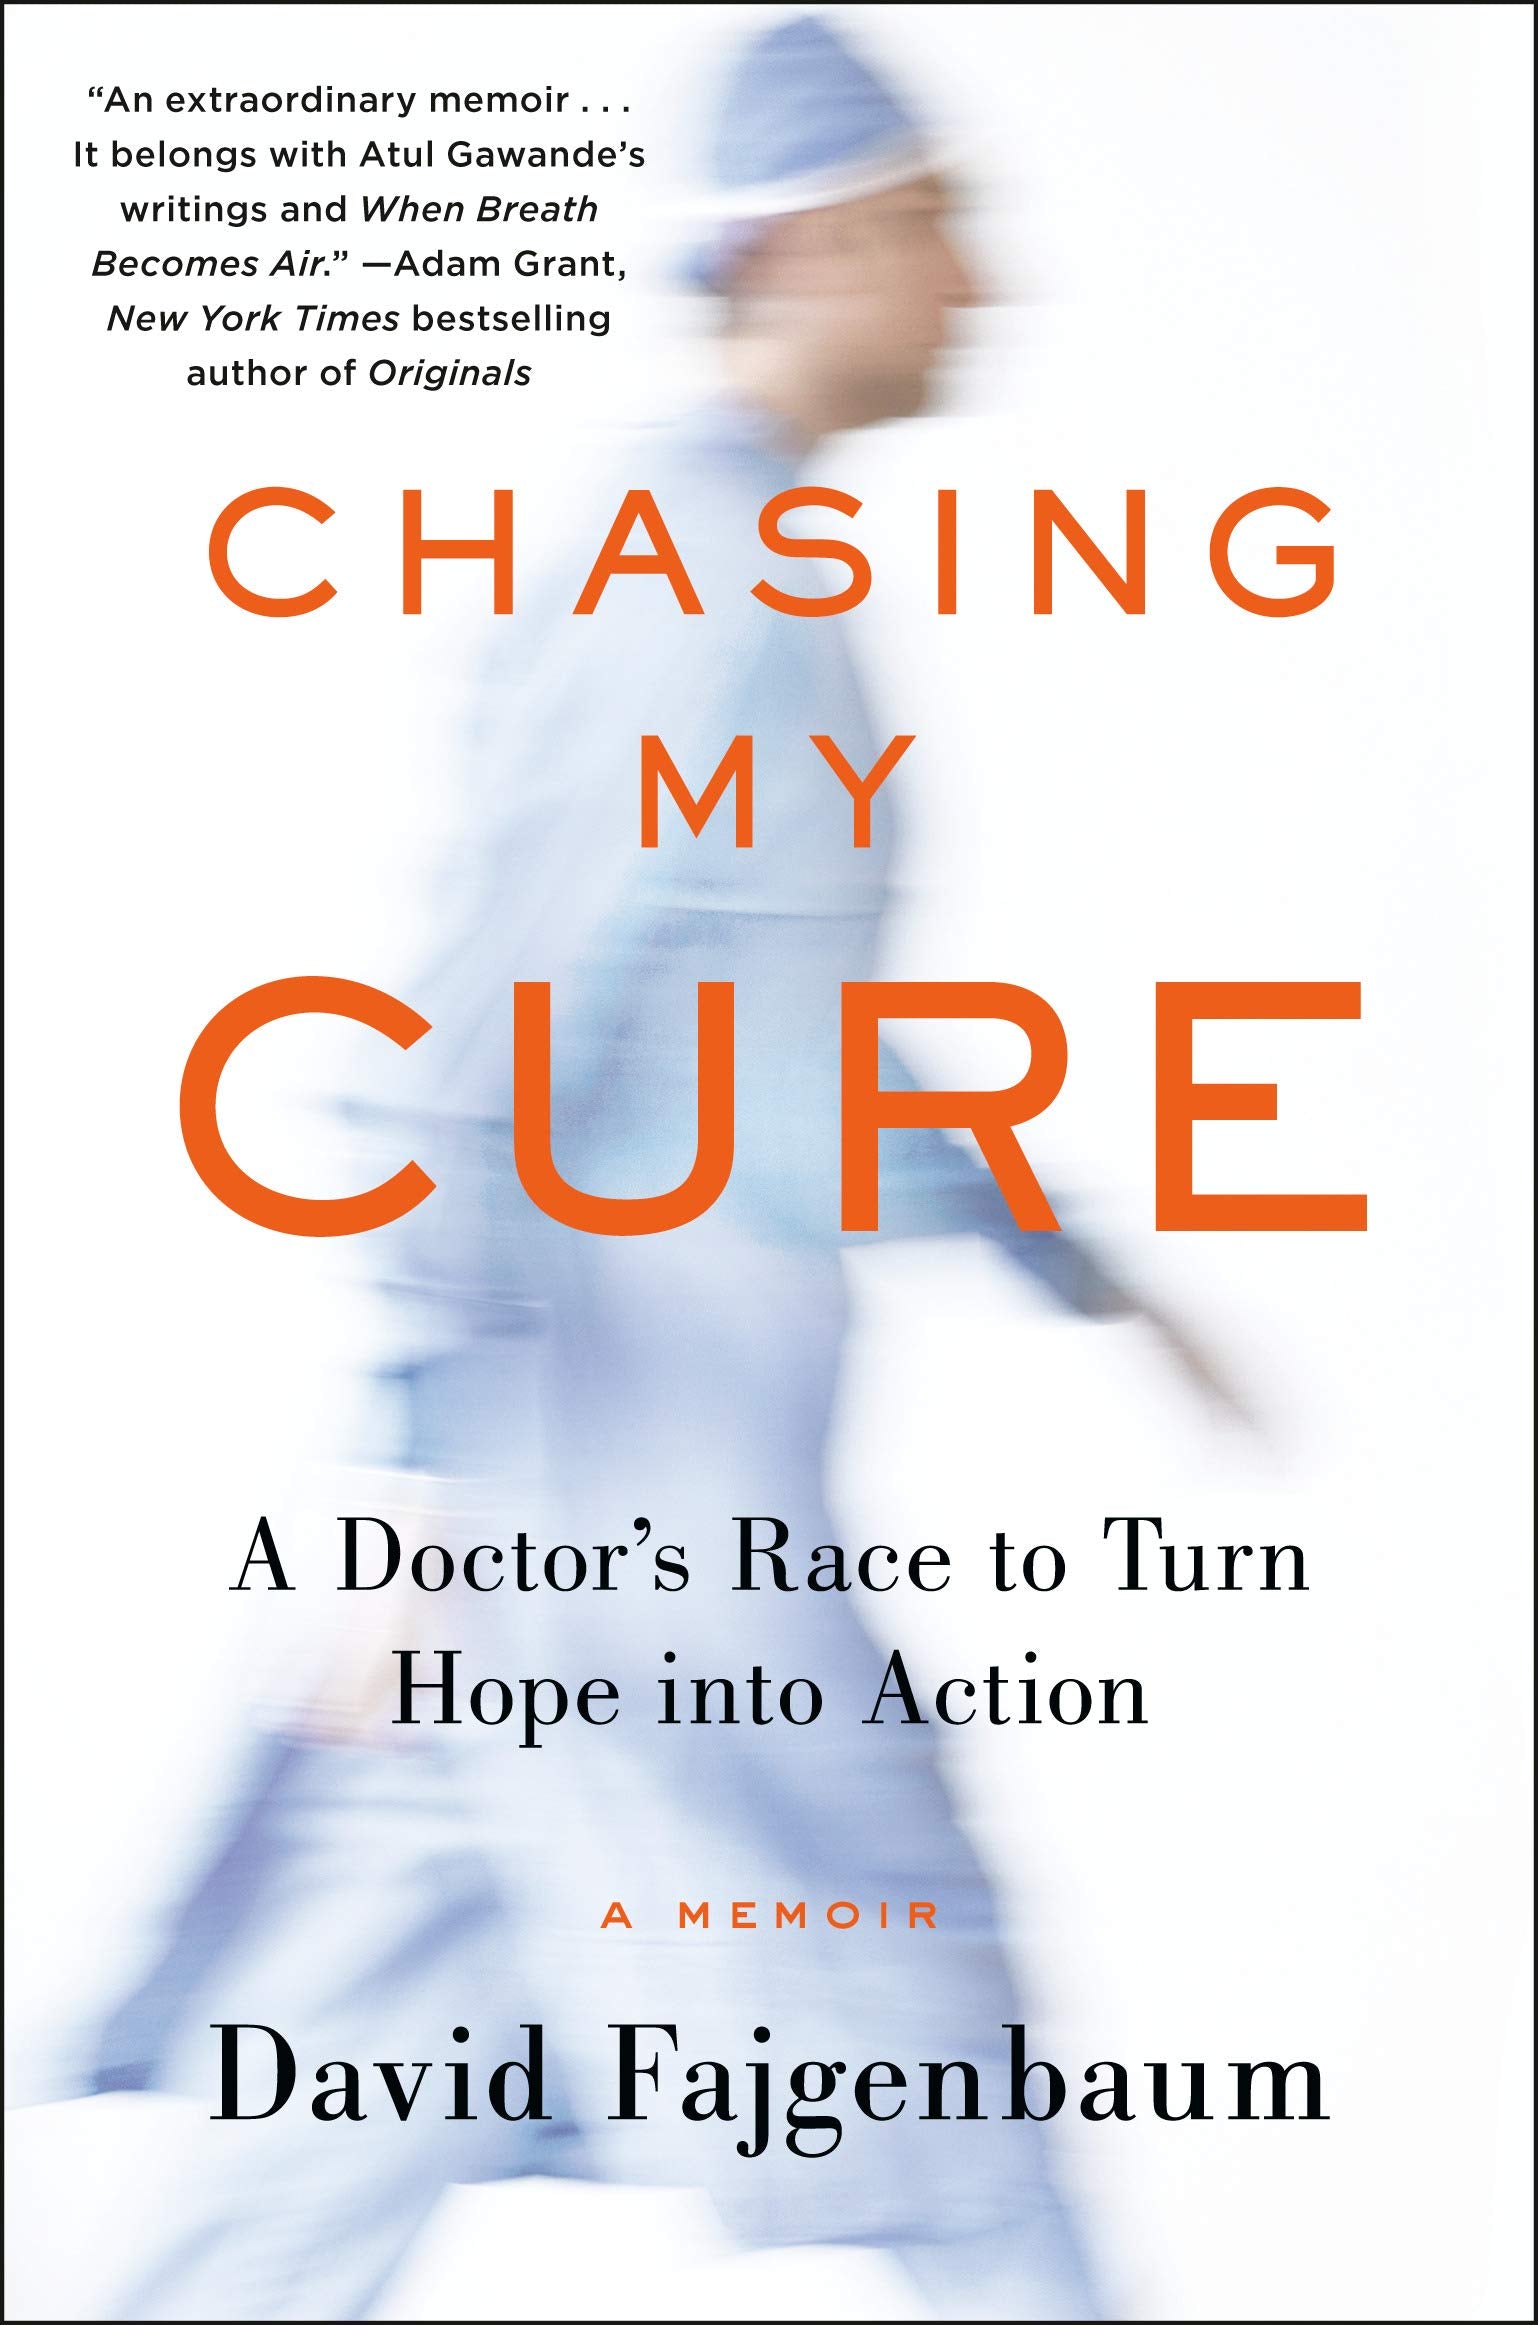 Chasing My Cure: A Doctorâ€™s Race to Turn Hope into Action